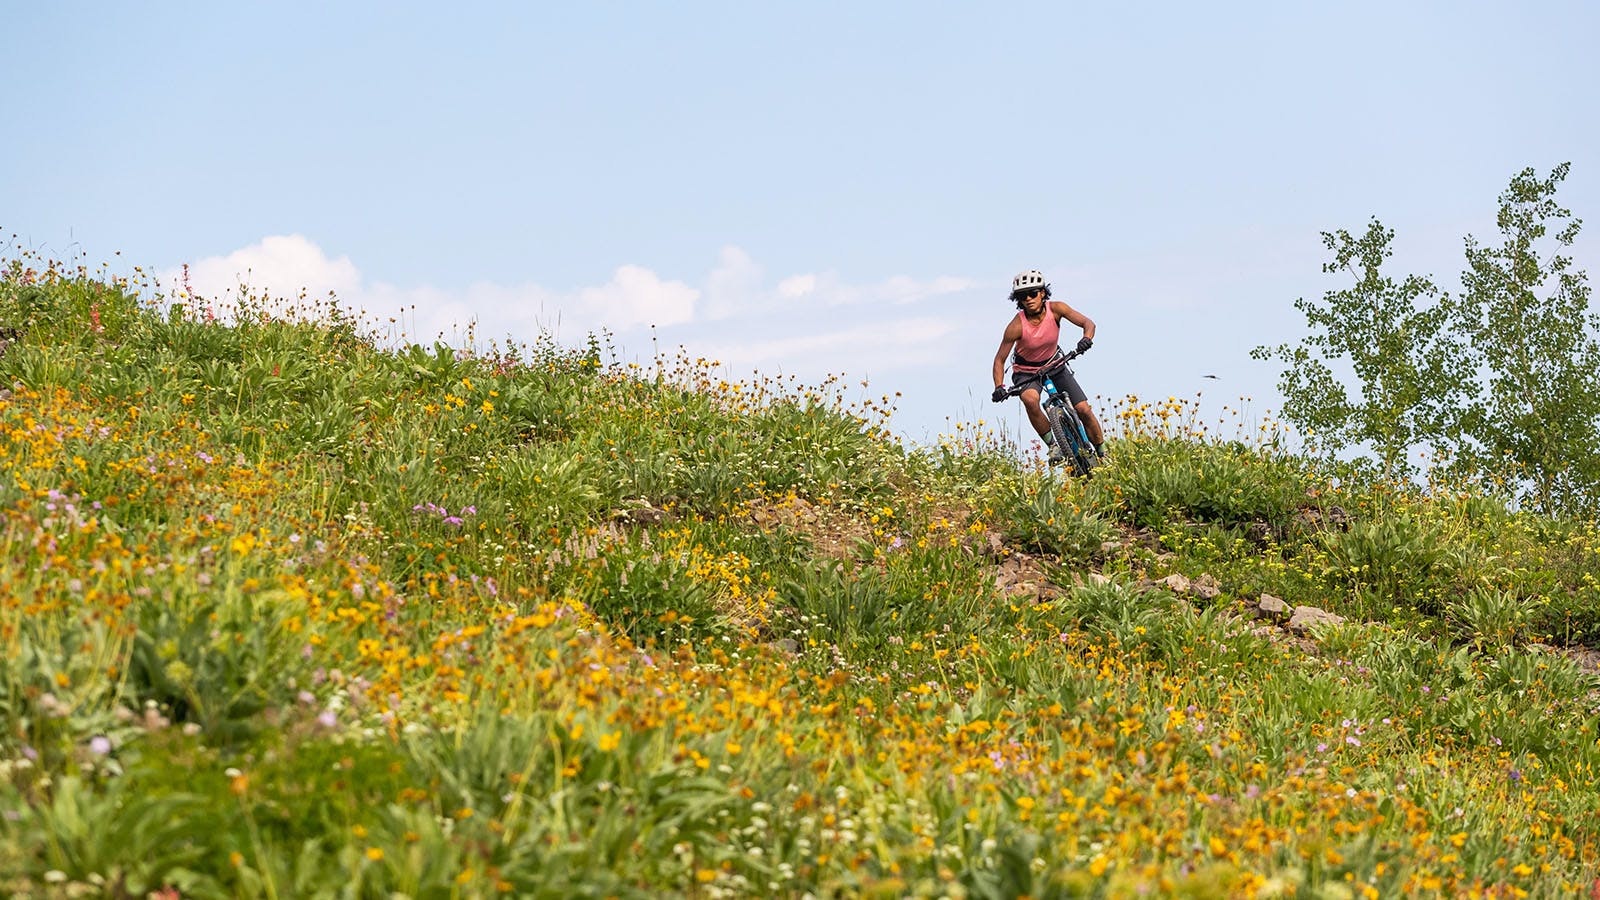 Emilé Newman riding her mountain bike on a singletrack trail surrounded by flowers